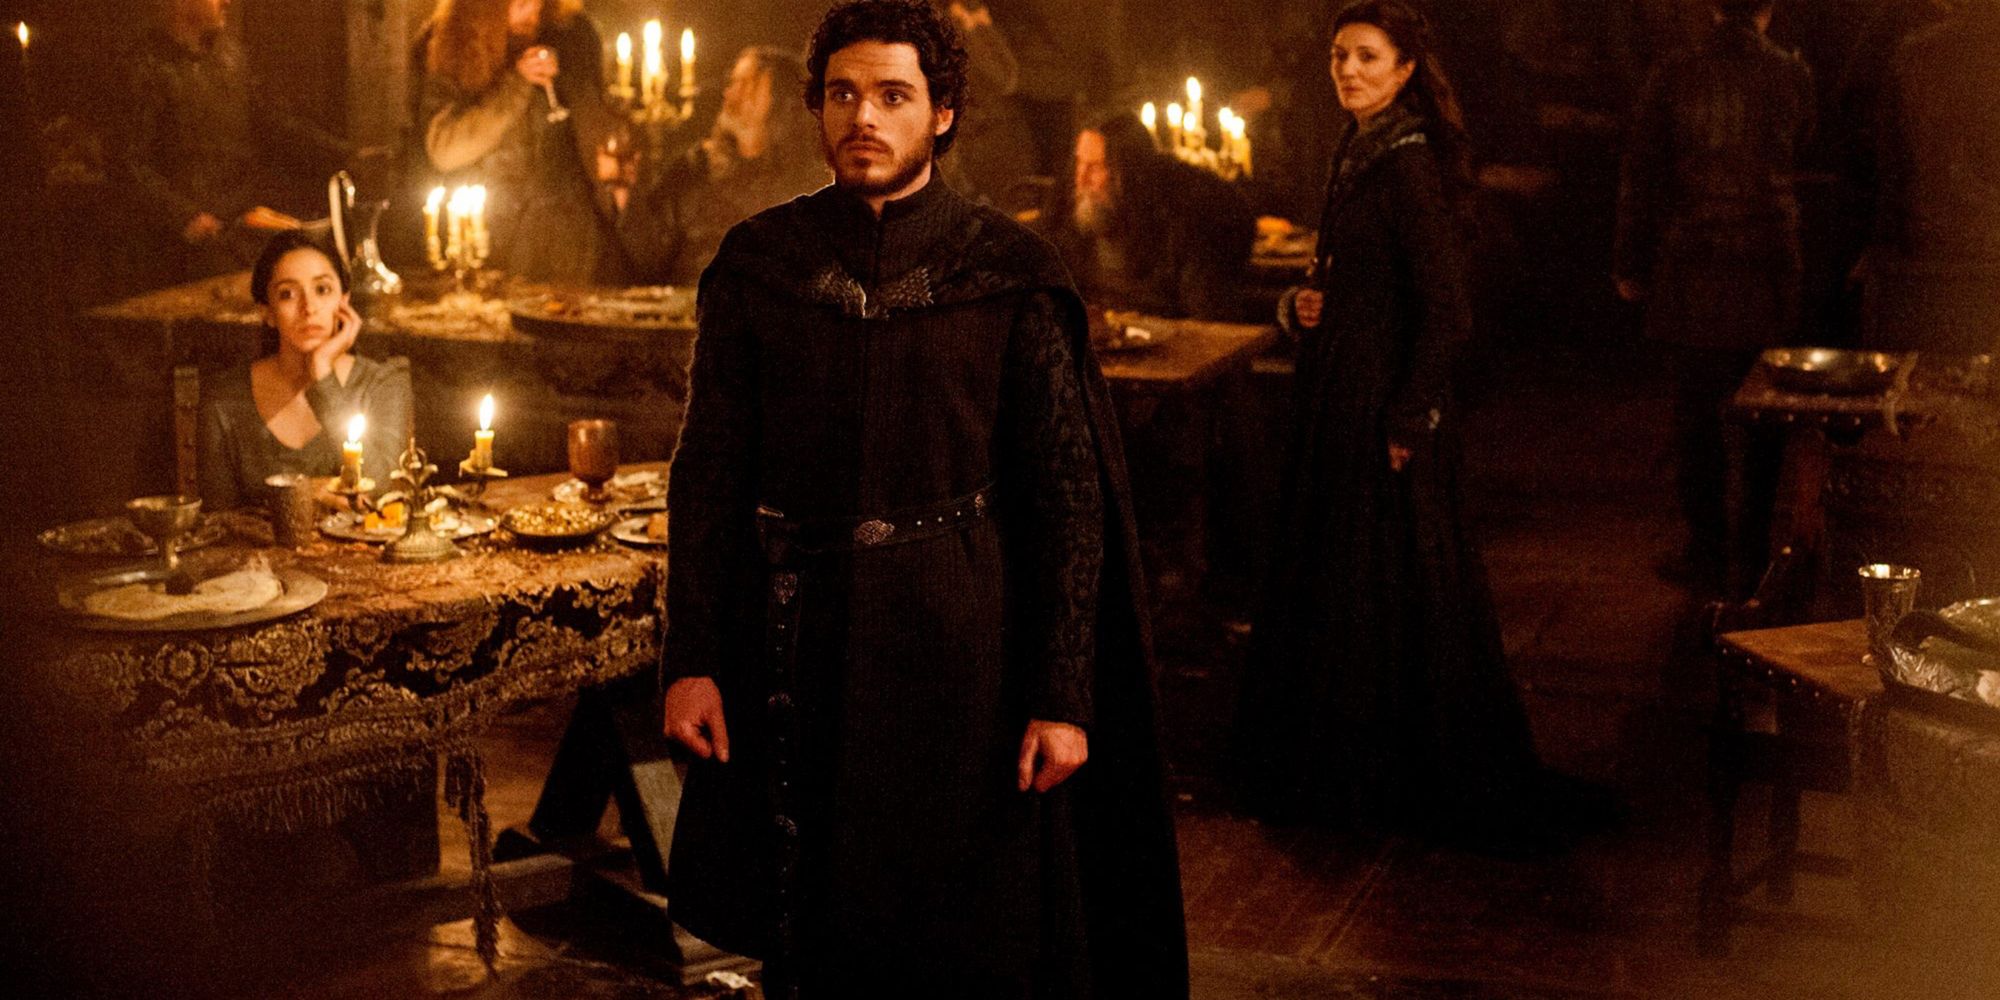 Robb at The Red Wedding